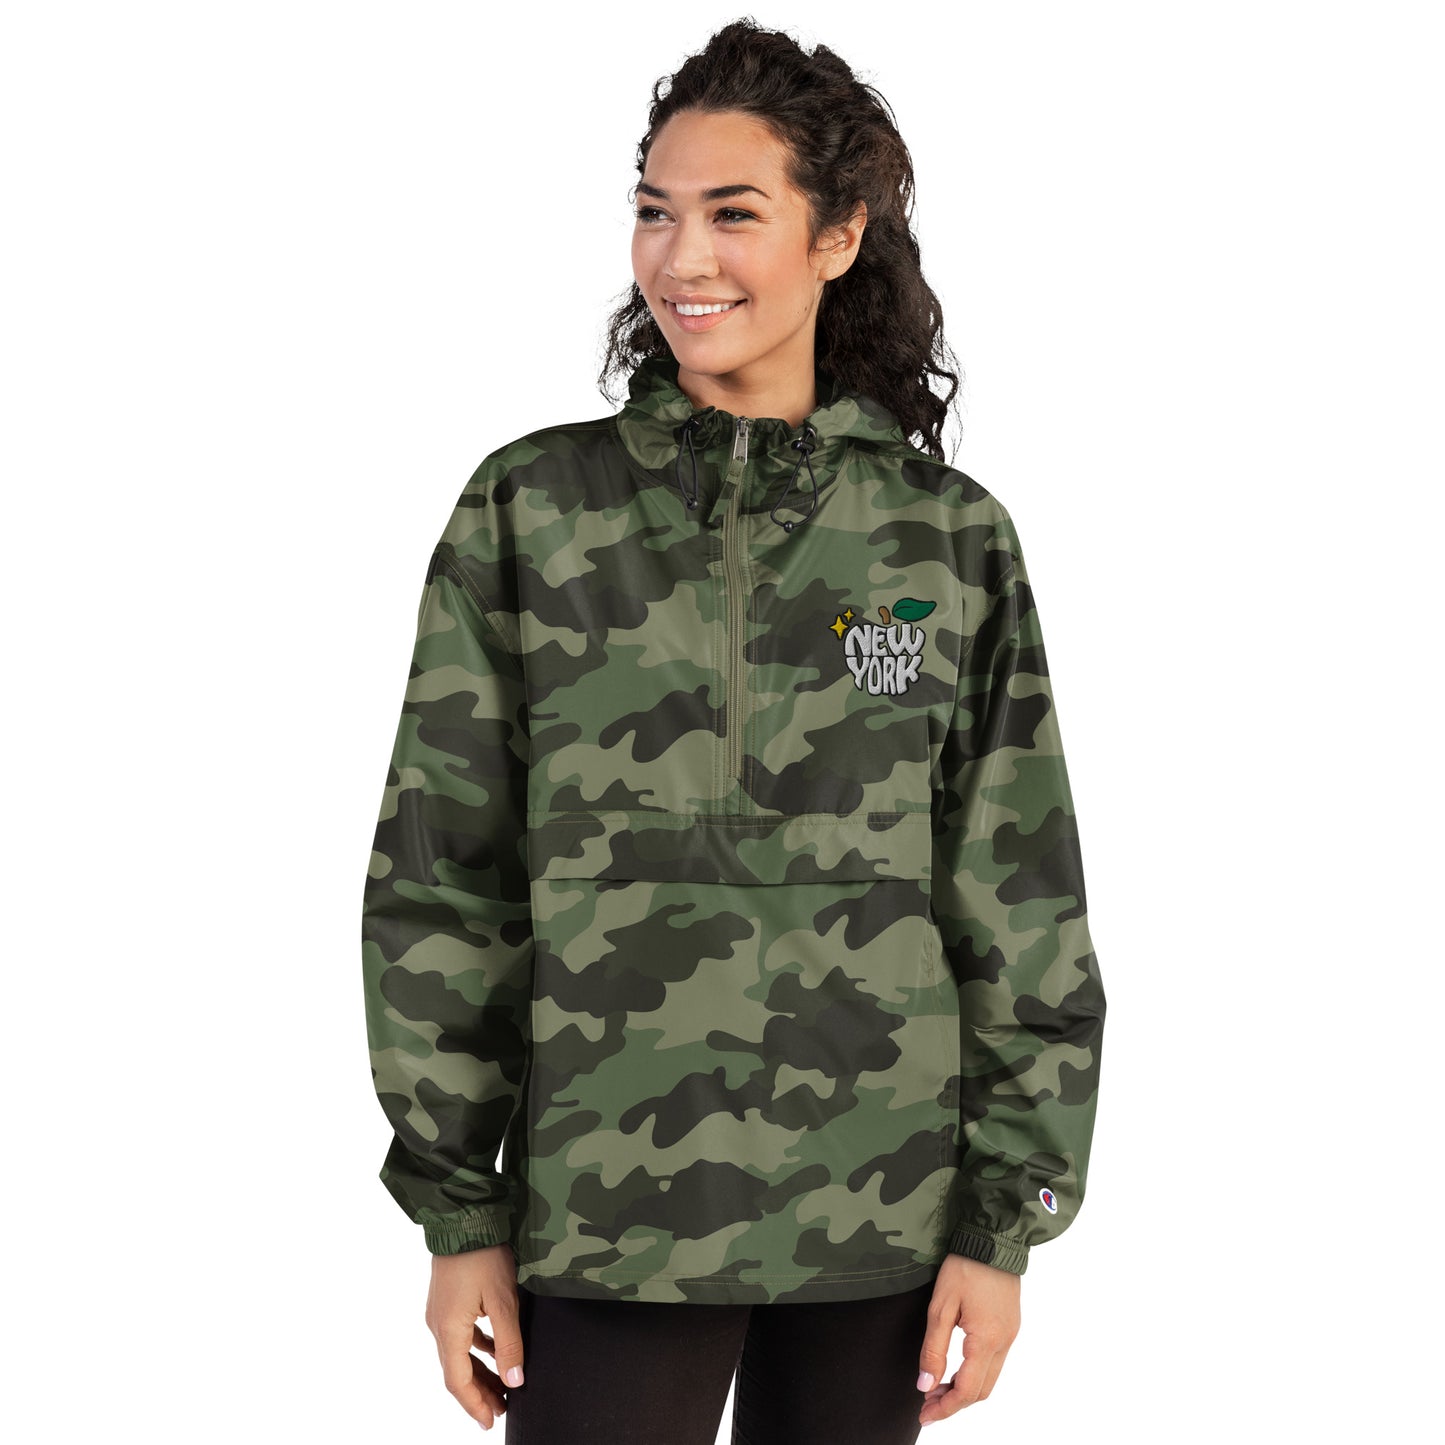 New York Apple Logo Embroidered Camo Champion Packable Windbreaker Jacket Scattered Streetwear